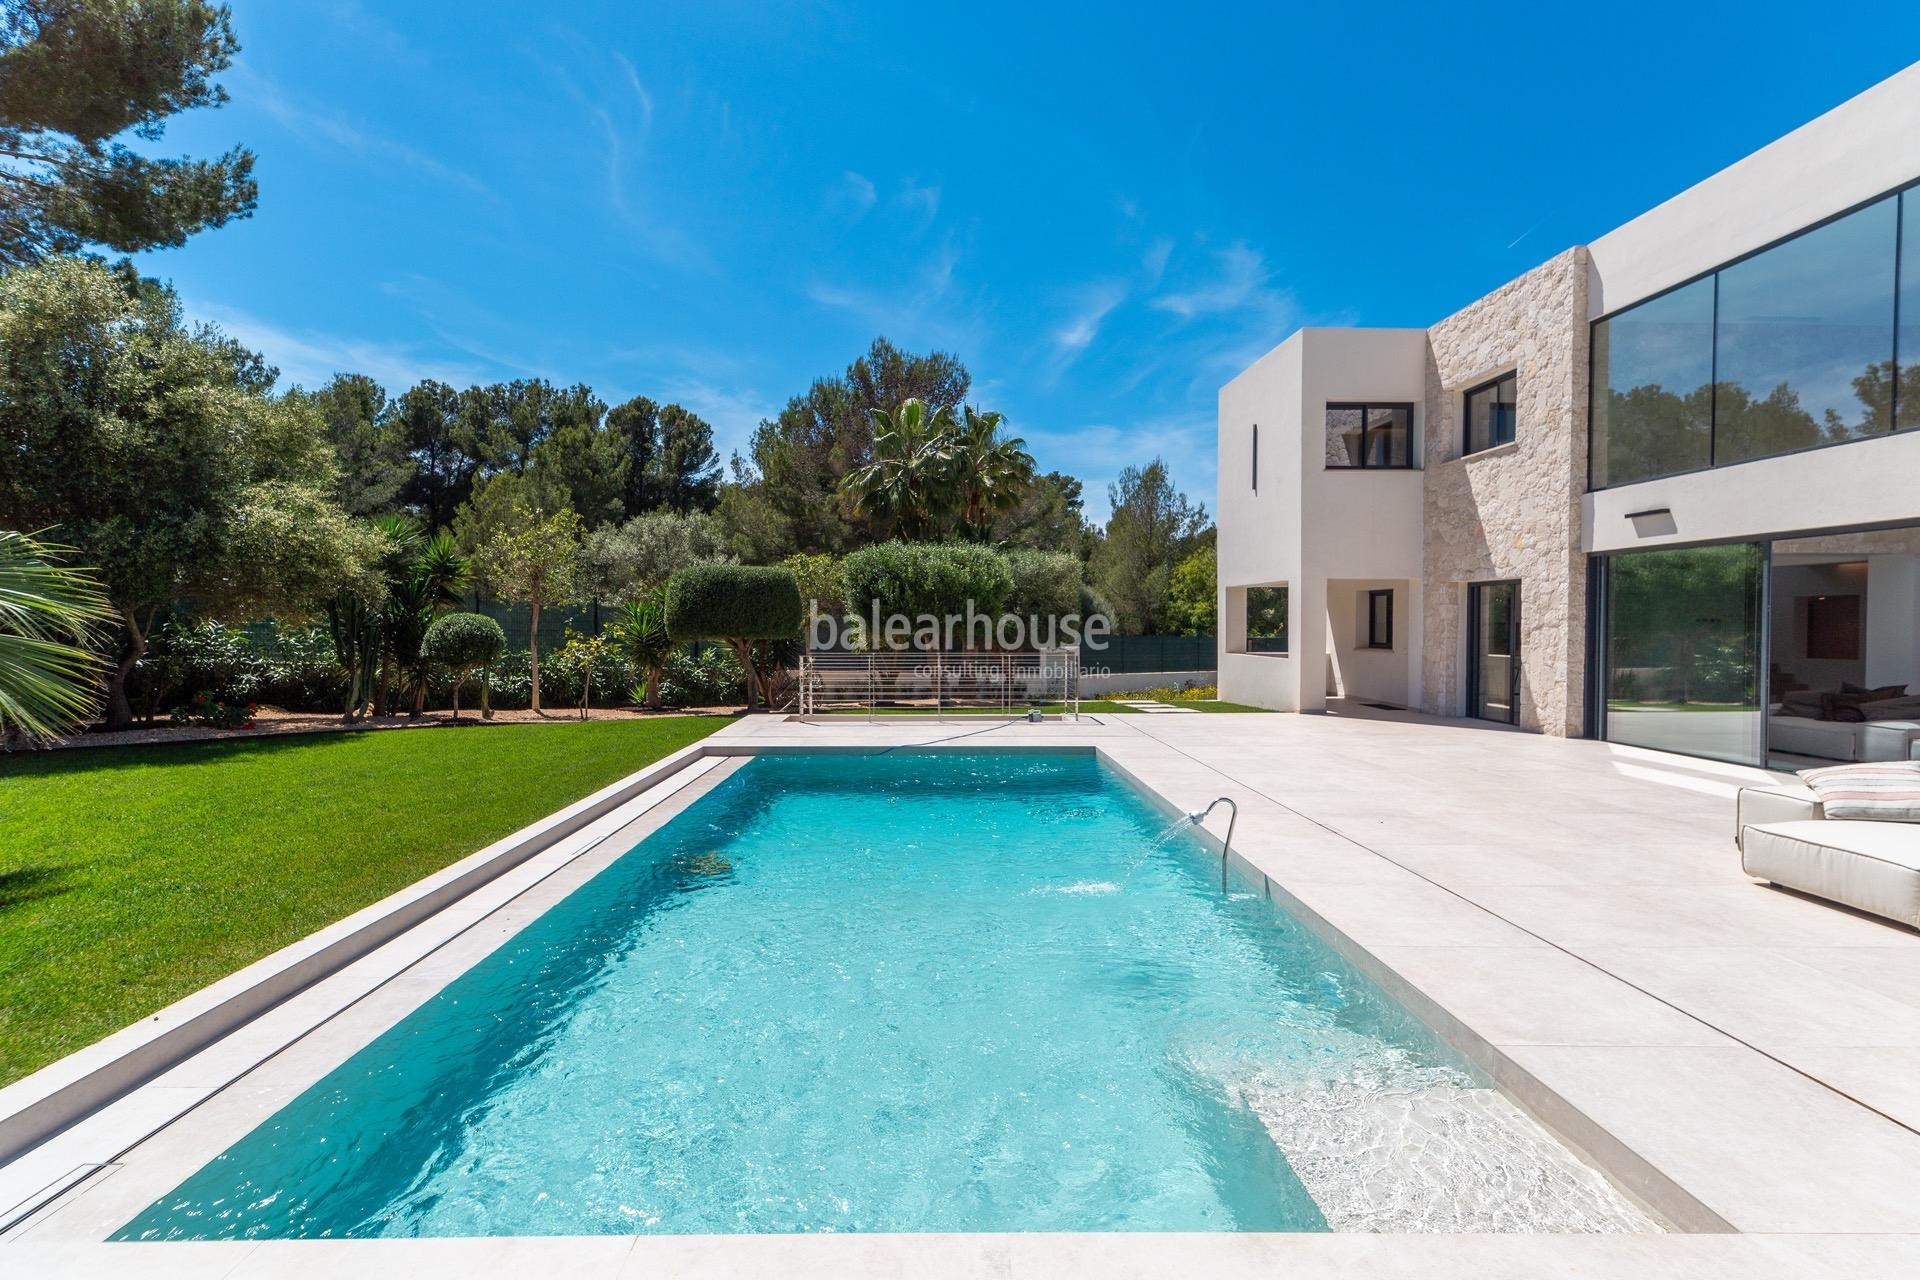 Impeccable Modern design villa full of light and large garden and pool spaces in Santa Ponsa